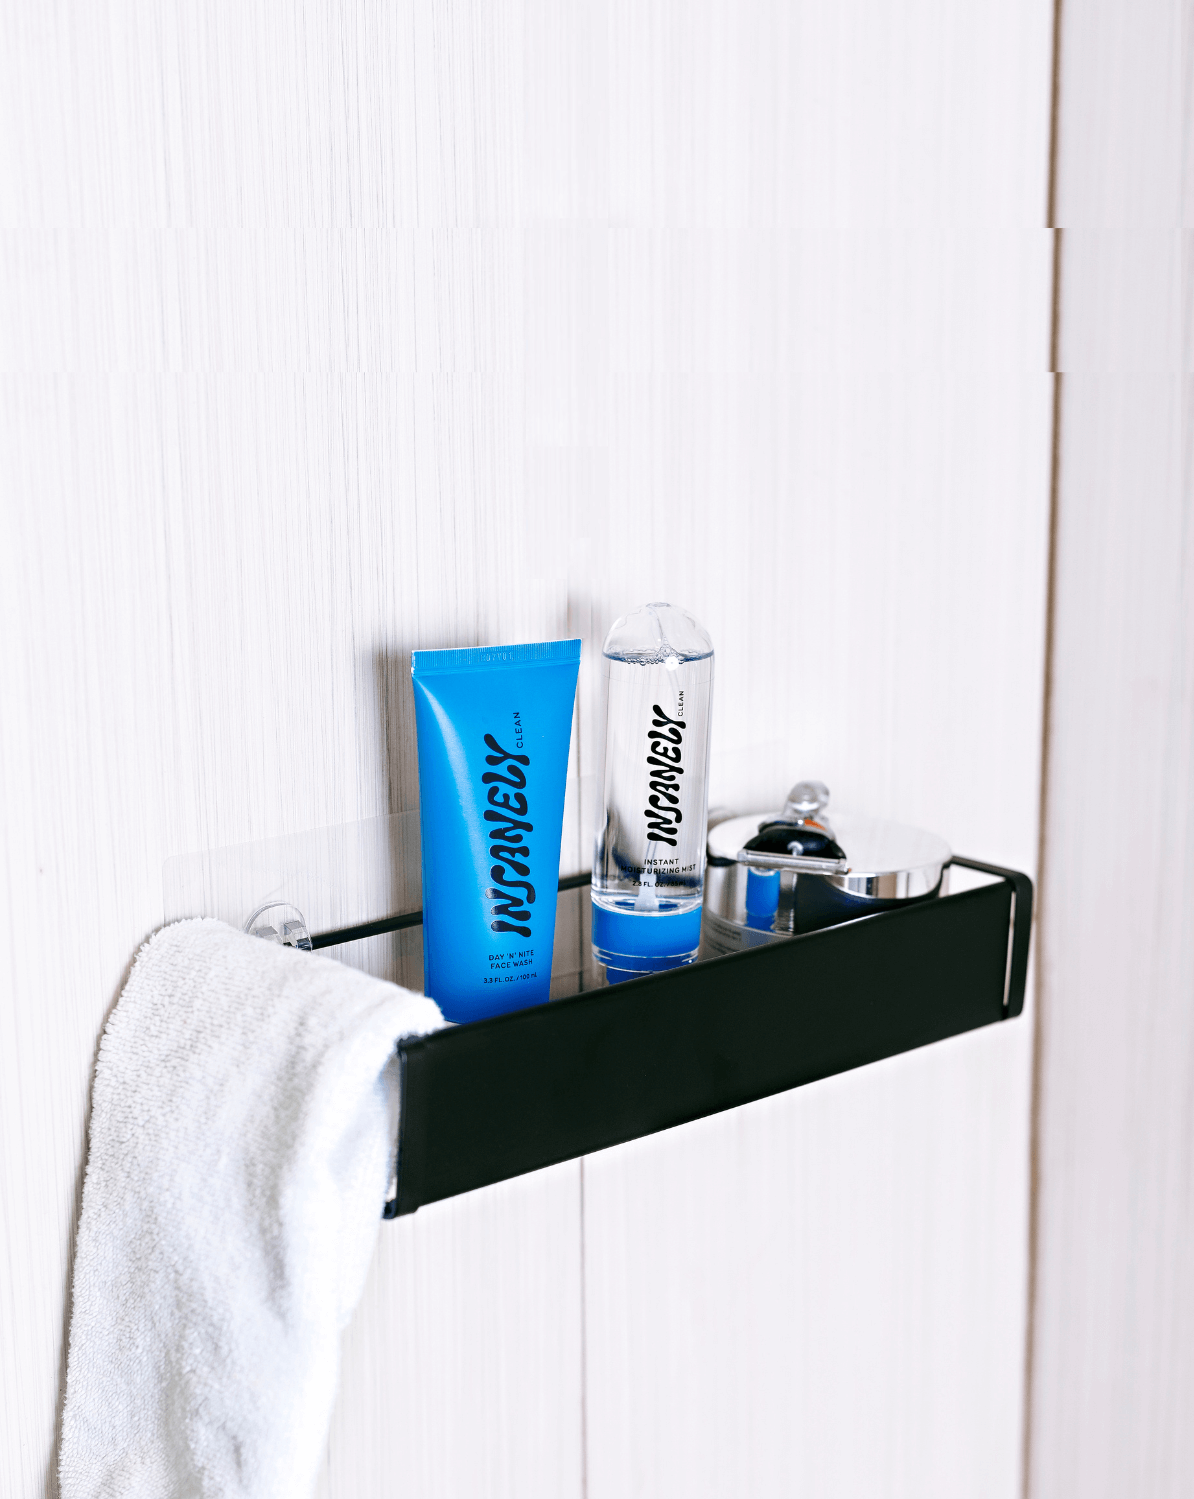 Men's skincare set placed in the bathroom for men to easily use the best natural face wash for men during their shower experience.